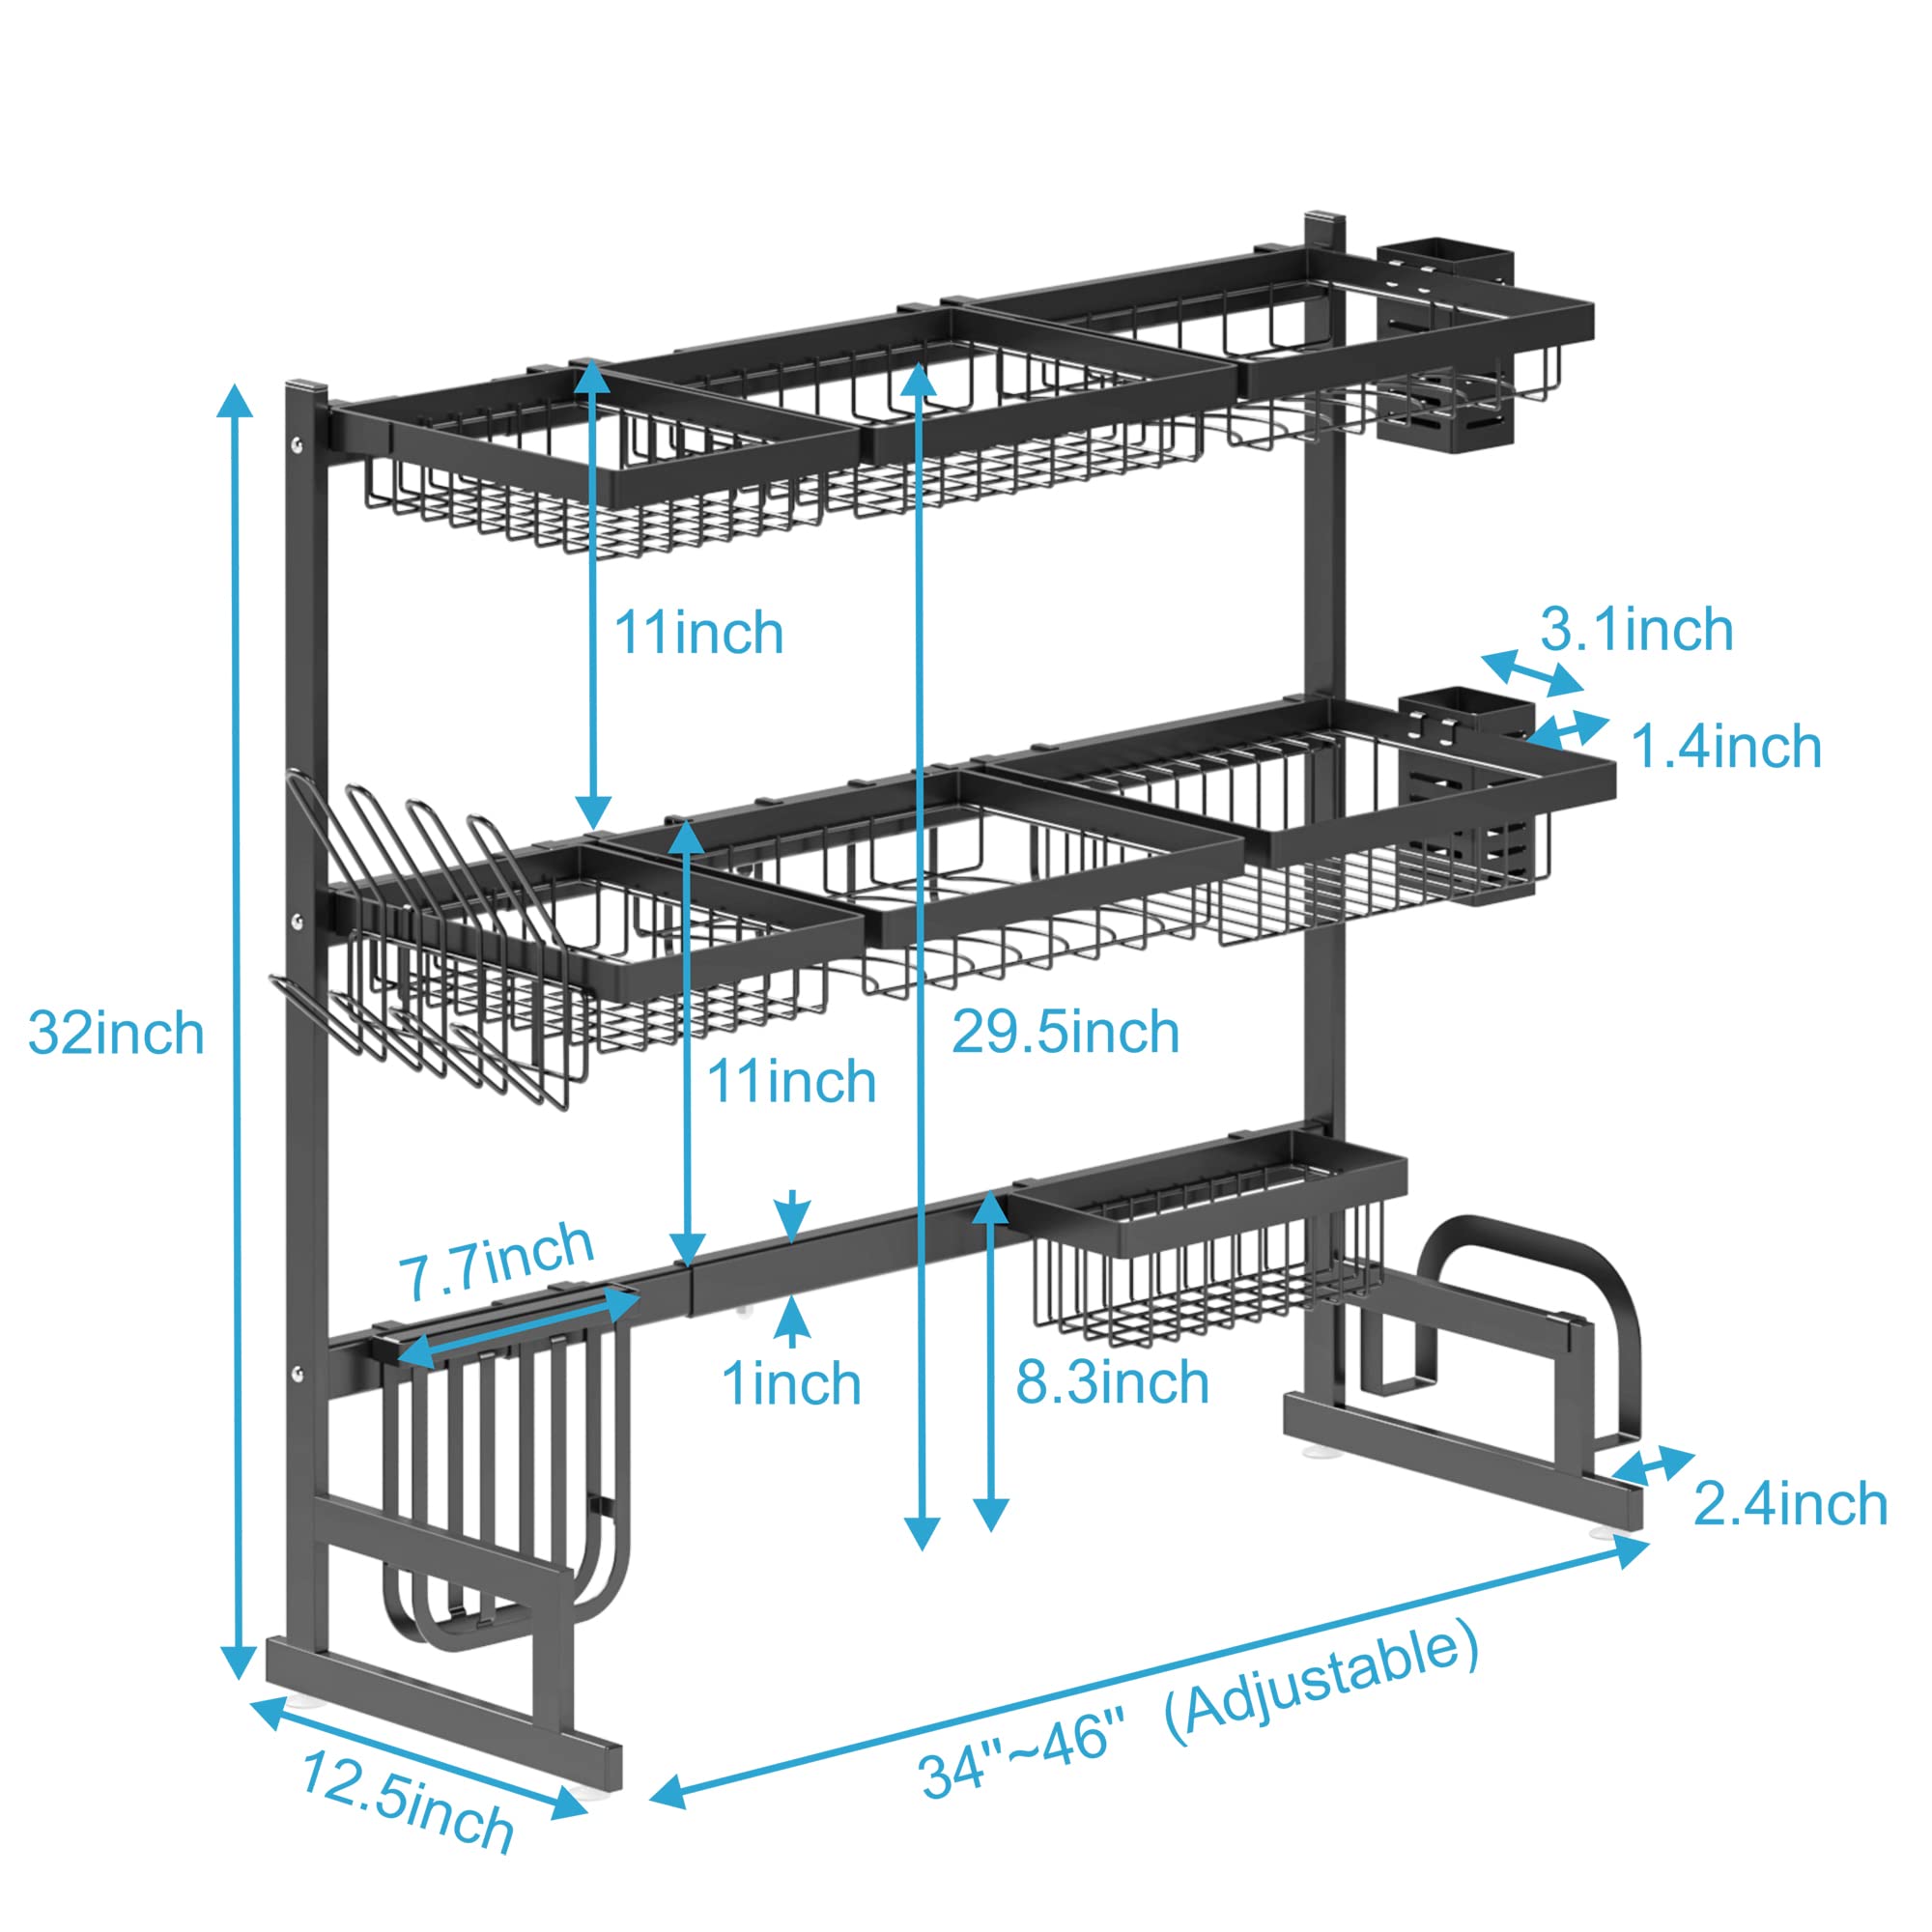 PUSDON Over Sink Dish Drying Rack (34"-45") 3 Tier, 2 Cutlery Holders Adjustable Dish Drainer for Kitchen Storage Countertop Organization, Stainless Steel Space Save Shelf (Sink Size≤44inch, Black)